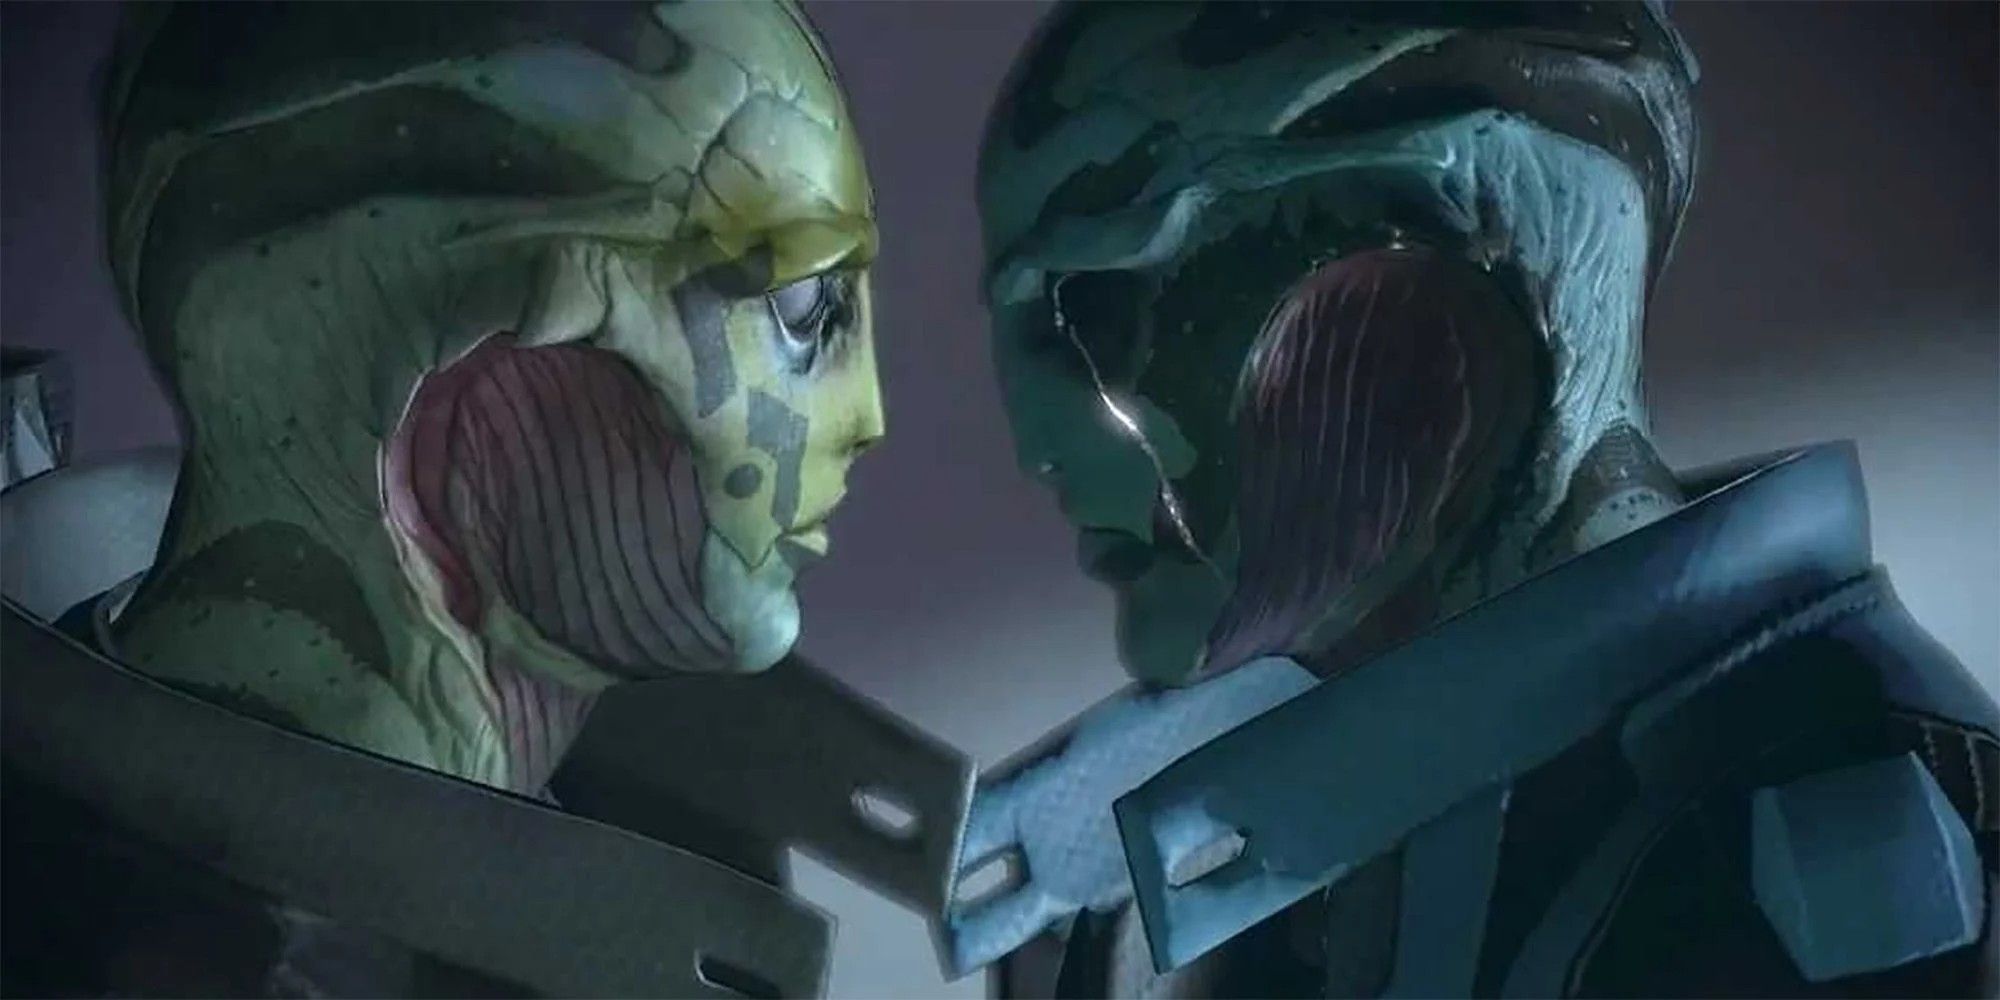 Thane reunites with his son Kolyat in a tearful confrontation during the Sins of the Father mission in Mass Effect 2